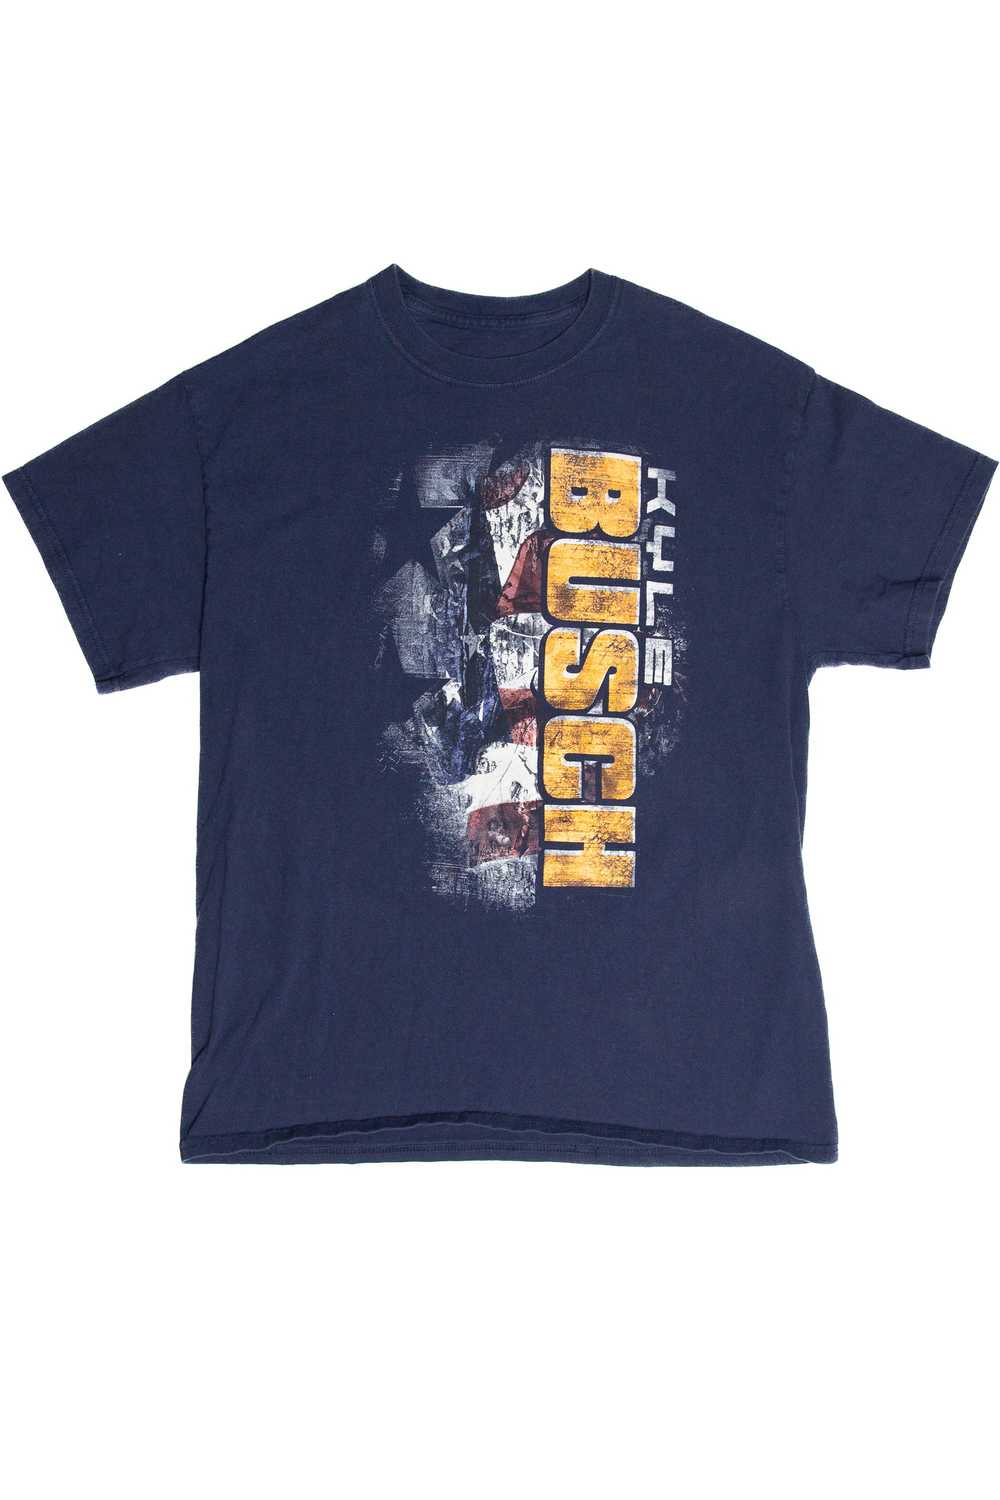 Recycled Kyle Busch Nascar T-Shirt - image 1